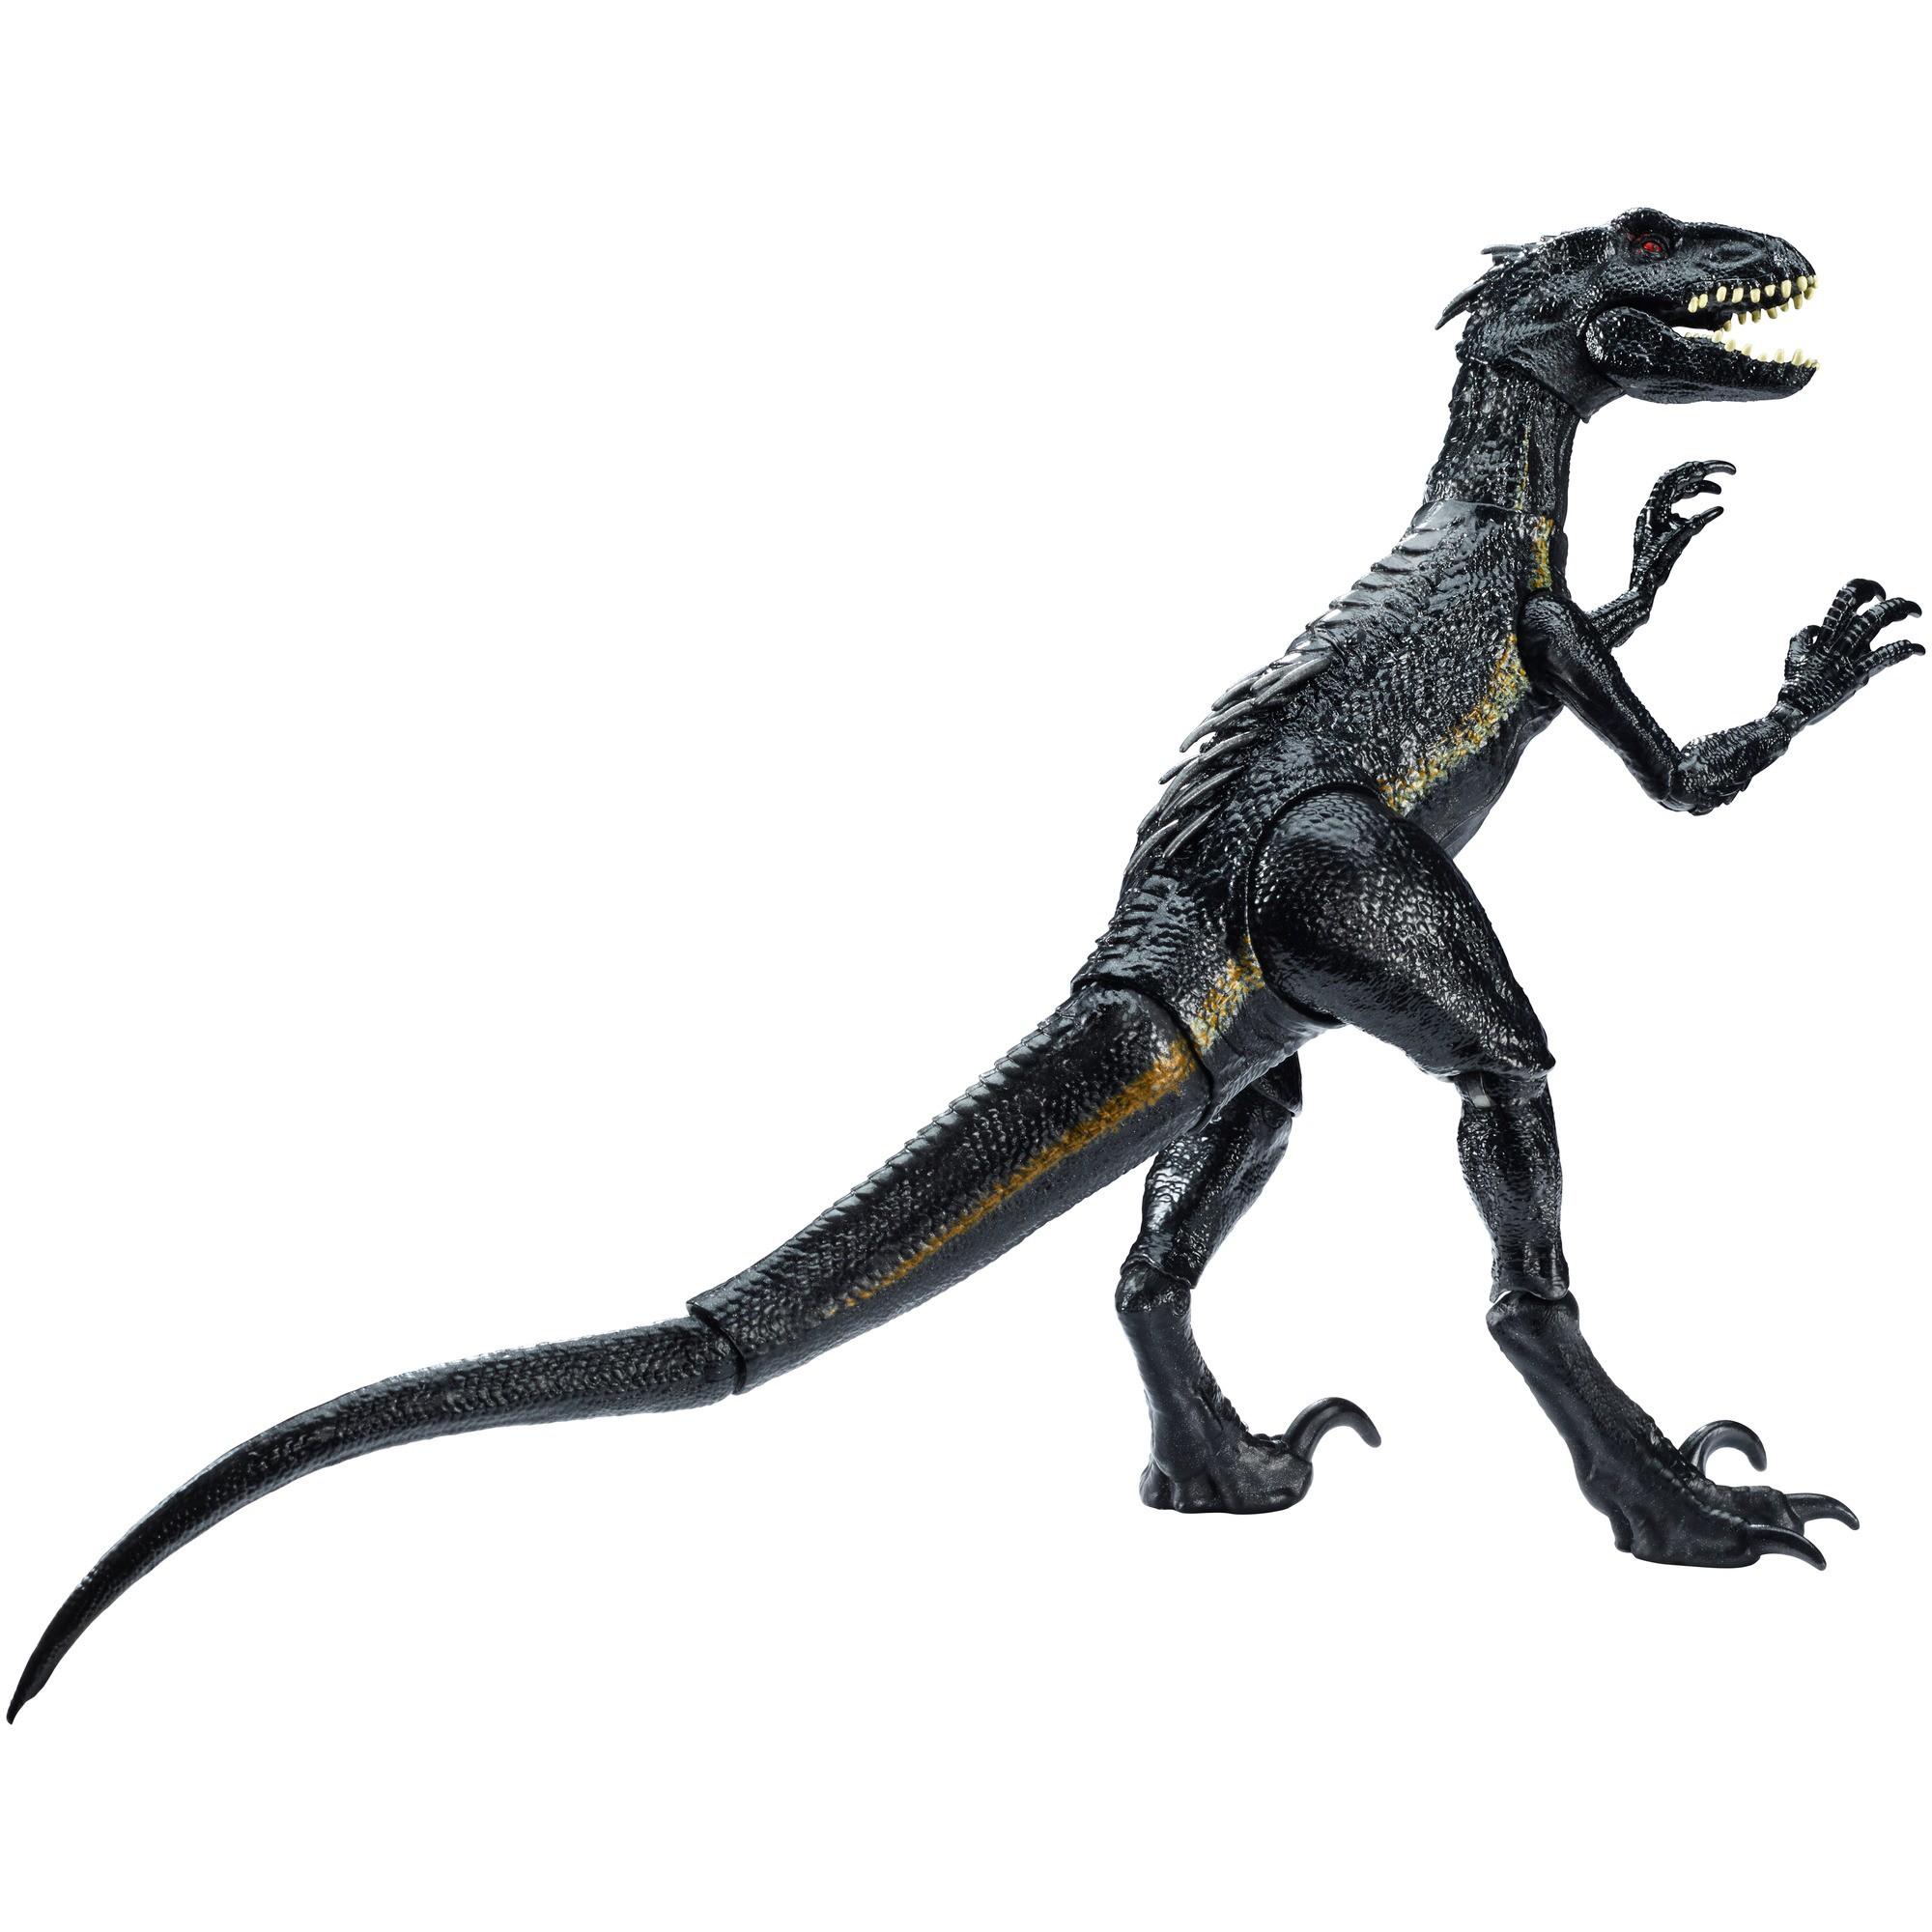 Jurassic World: Fallen Kingdom Indoraptor Dinosaur Action Figure with Movable Joints, Toy Gift ​ - image 3 of 6